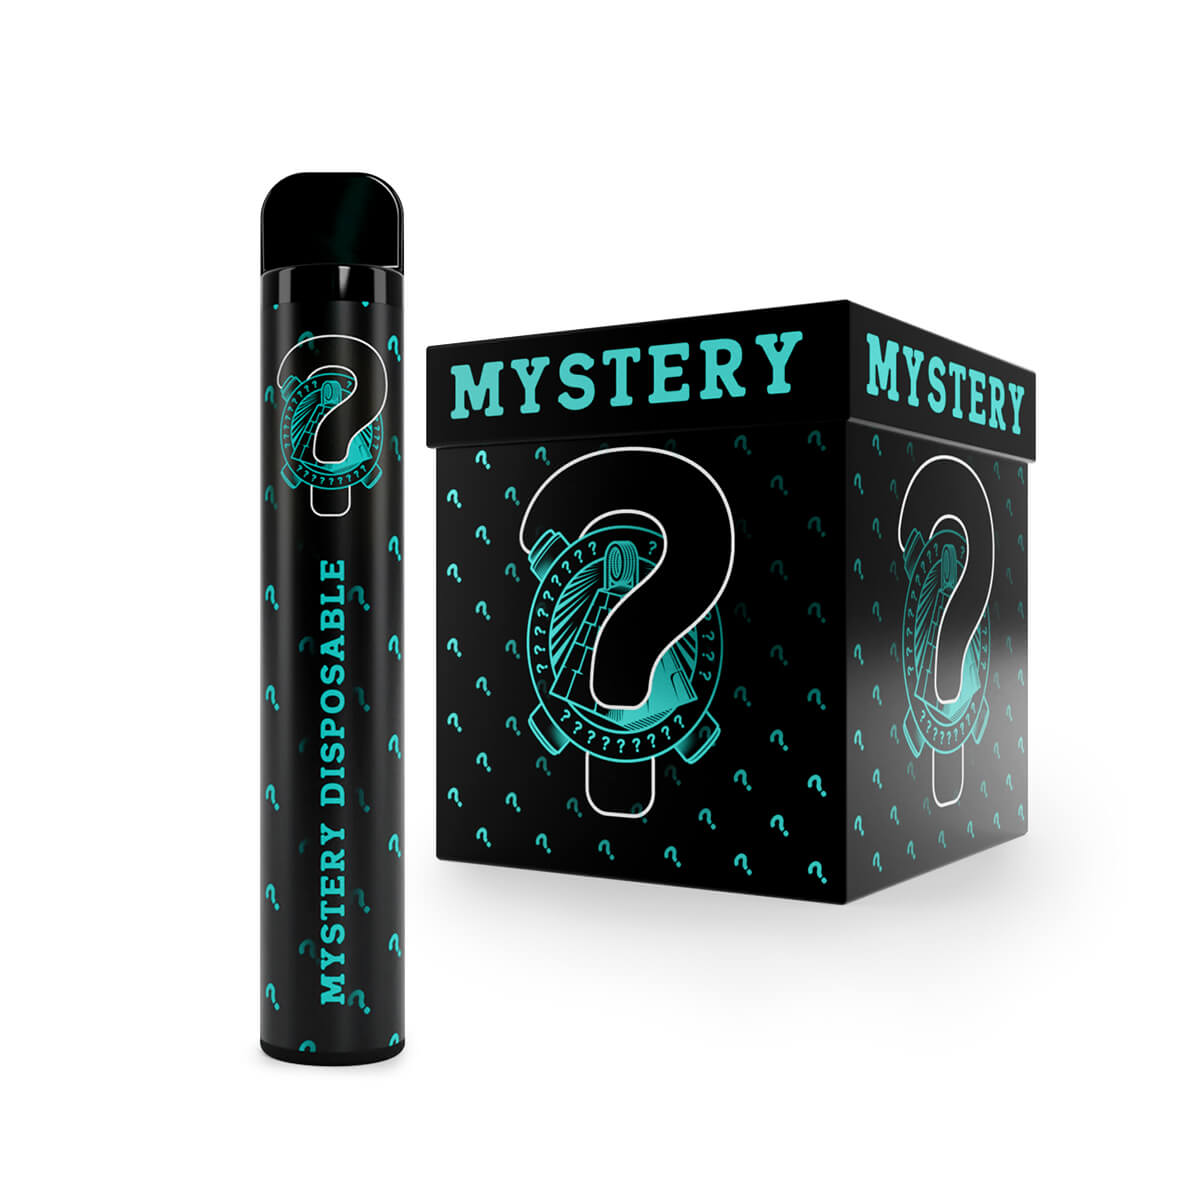 With so many great flavours to choose from why not try one of our popular Mystery disposable boxes, available at dispergo vaping uk.